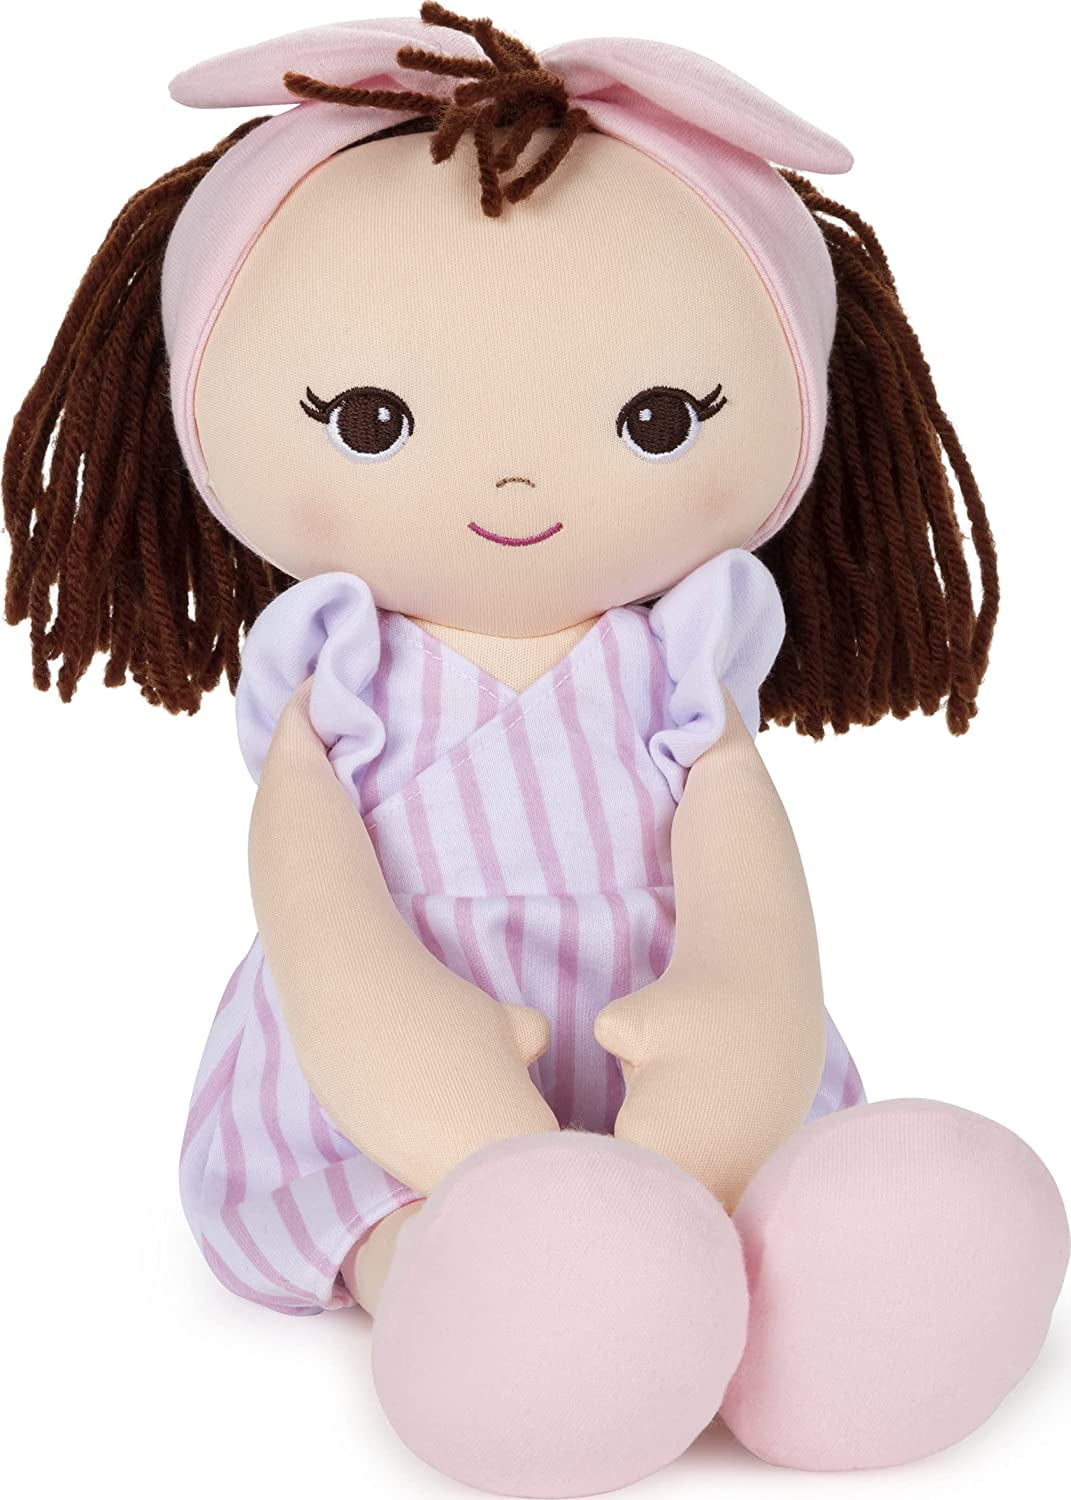  June Garden My First Basket Plush Baby Doll Set - Includes 1  Basket and 4 Multicultural Soft Plush Babies with Emotional Expressions for  Infants and Toddlers Birth and Up : Toys & Games